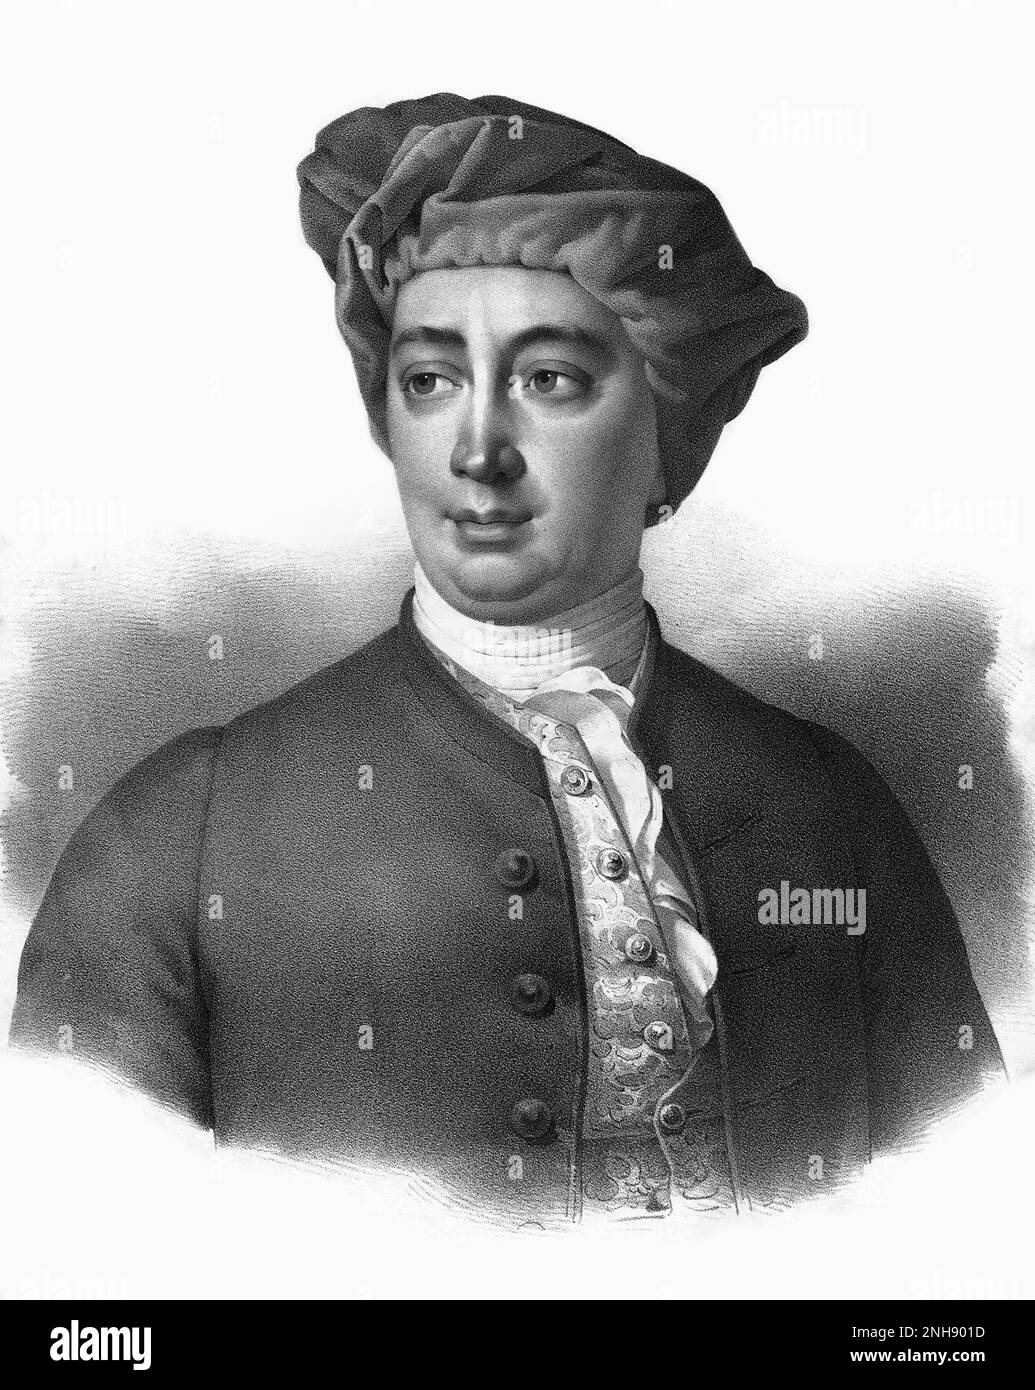 David Hume (1711-1776), Scottish Enlightenment philosopher, historian, and economist, best known for his highly influential system of philosophical empiricism, skepticism, and naturalism. Lithograph after portrait by Antoine Maurin (1793-1860), 1820. Stock Photo